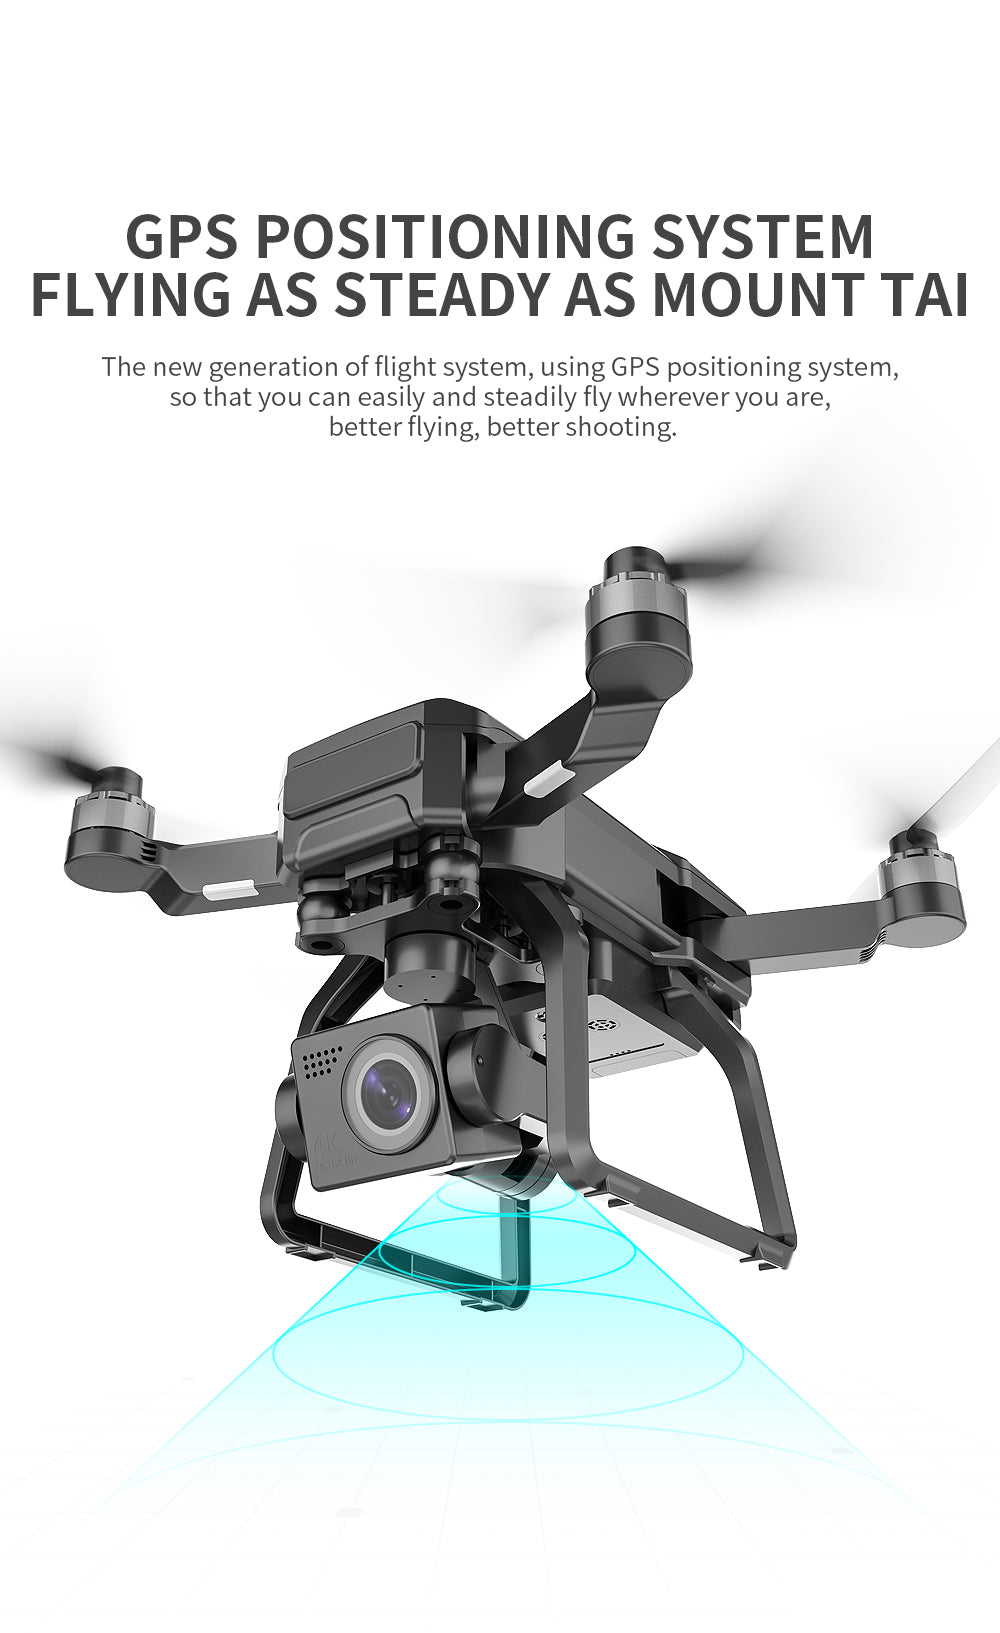 SJRC F7 PRO / F7S Pro Drone, GPS POSITIONING SYSTEM FLYING AS STEADY AS MOUNT